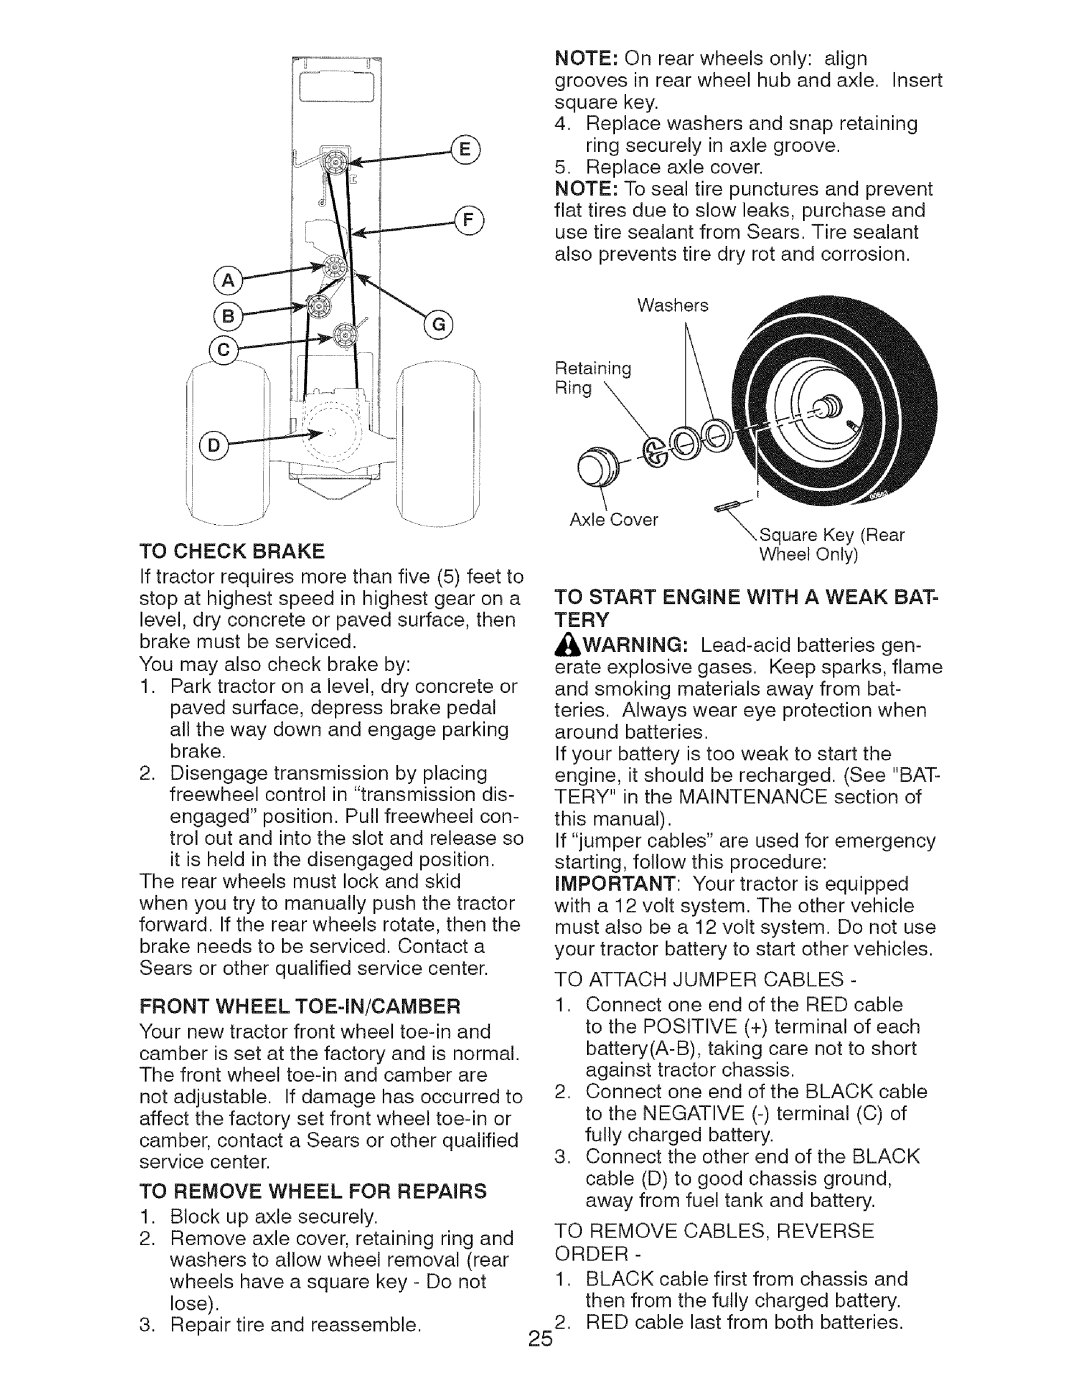 Craftsman 917.28726 owner manual Front Wheel Toe-In/Camber 